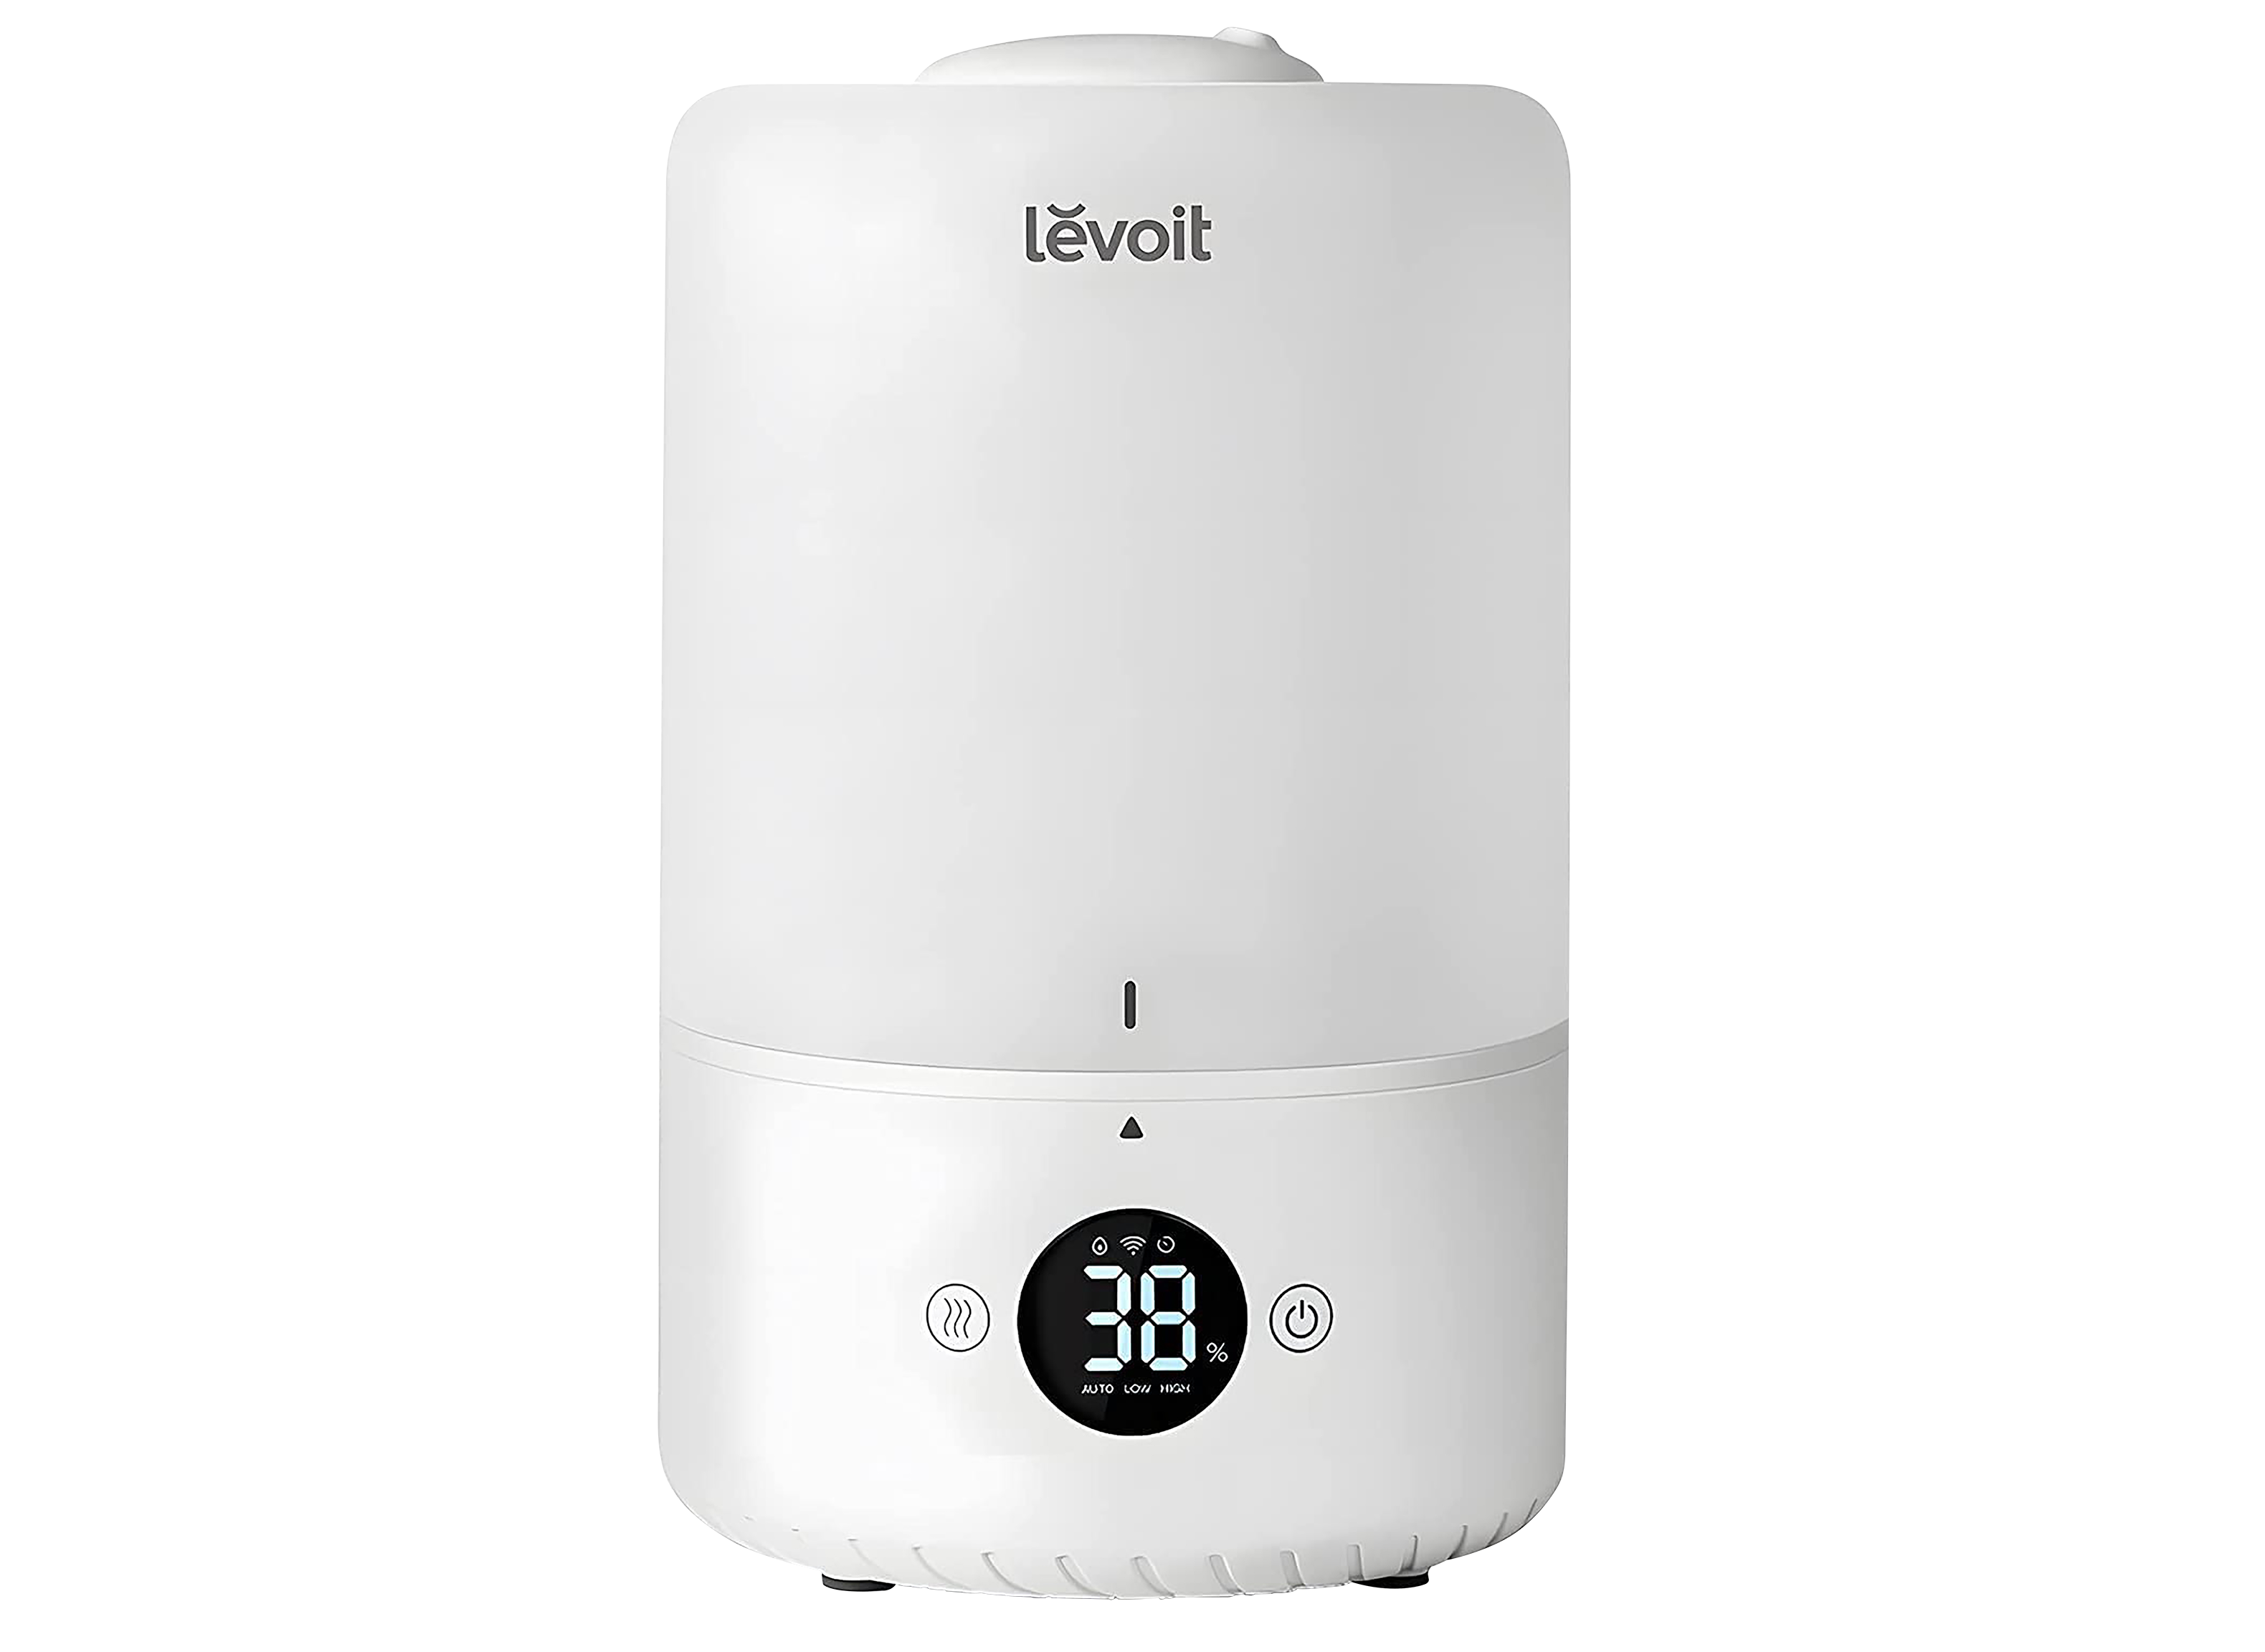 Levoit Dual 200S Smart Humidifier Review - Consumer Reports